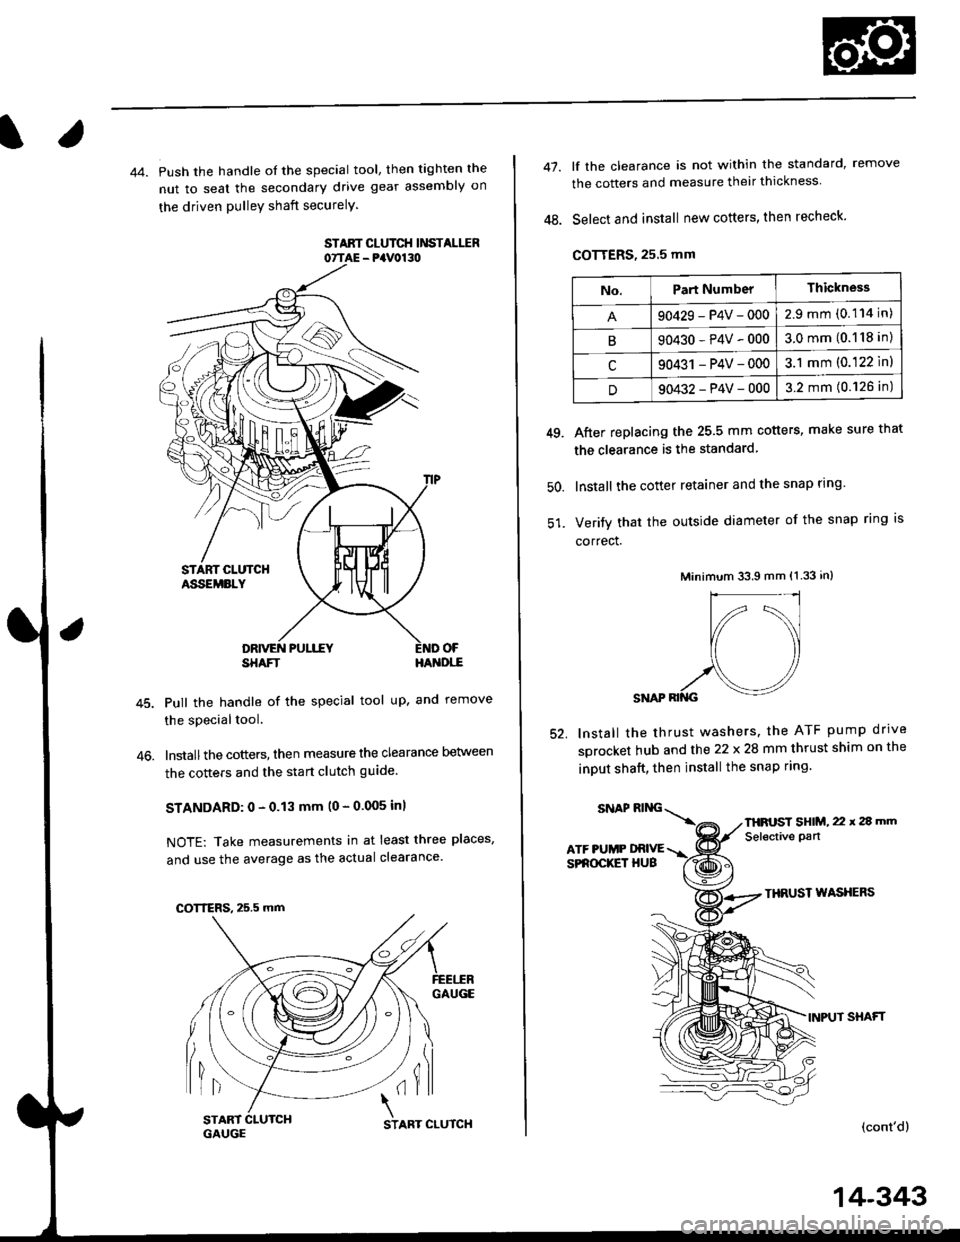 HONDA CIVIC 1996 6.G Workshop Manual 44. Push the handle of the special tool, then tighten the
nut to seal the secondary drive gear assembly on
the driven pulleY shaft securelY.
STAAT CLUTCH IiISTALIIR07TAE - PaV0130
OF
46.
SHAFTHA{DI,